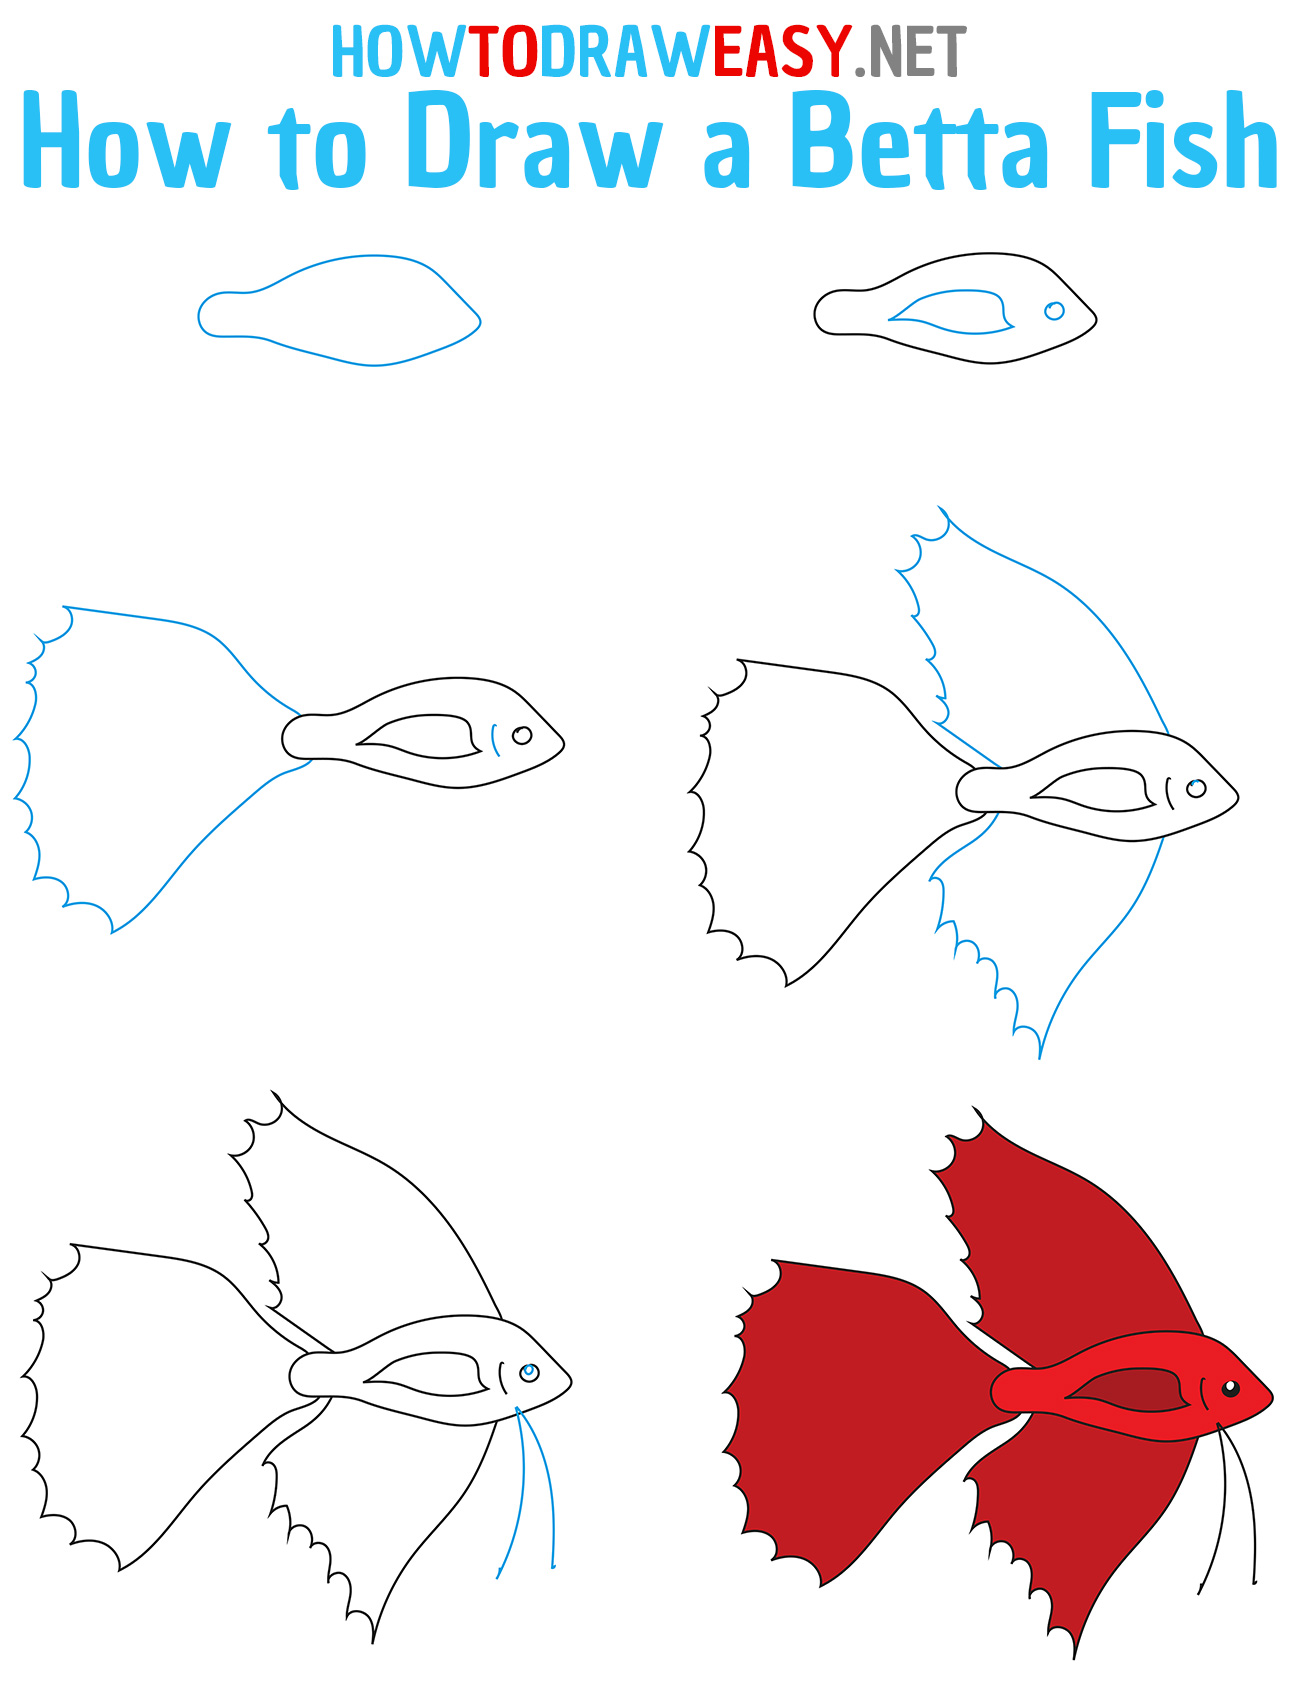 How to Draw a Betta Fish Step by Step